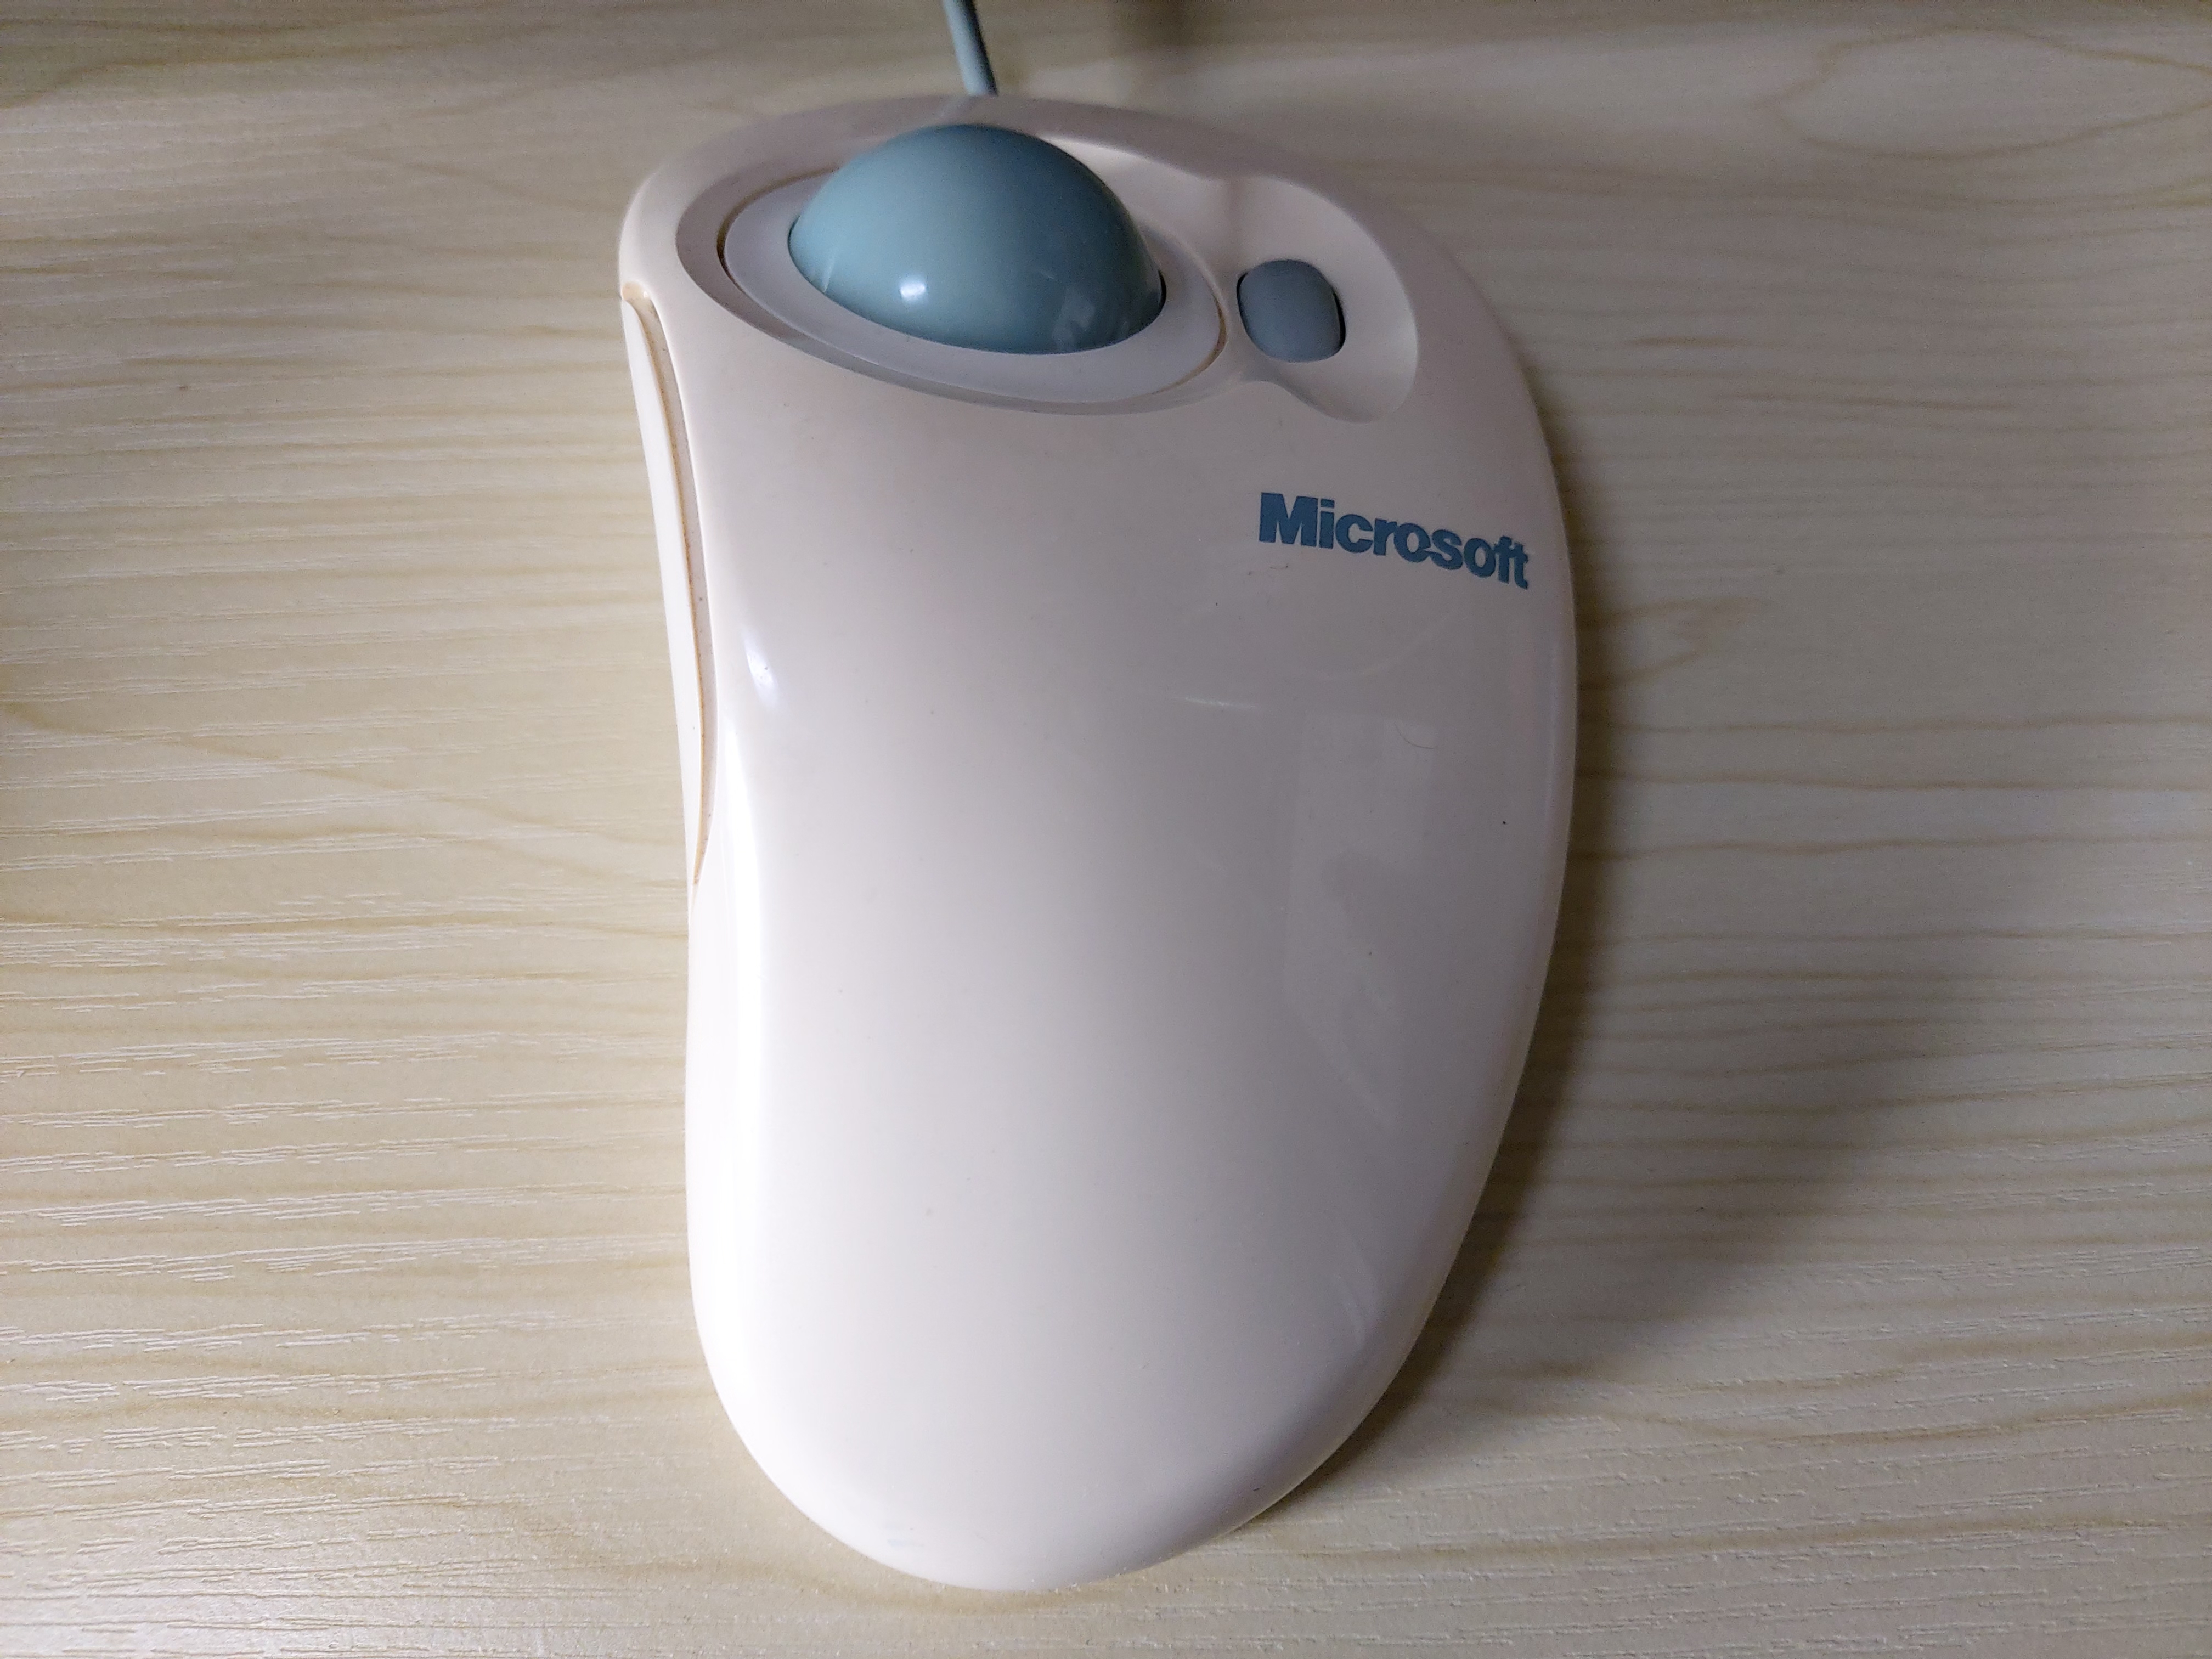 Microsoft IntelliMouse Trackball V1.0 and PS/2 